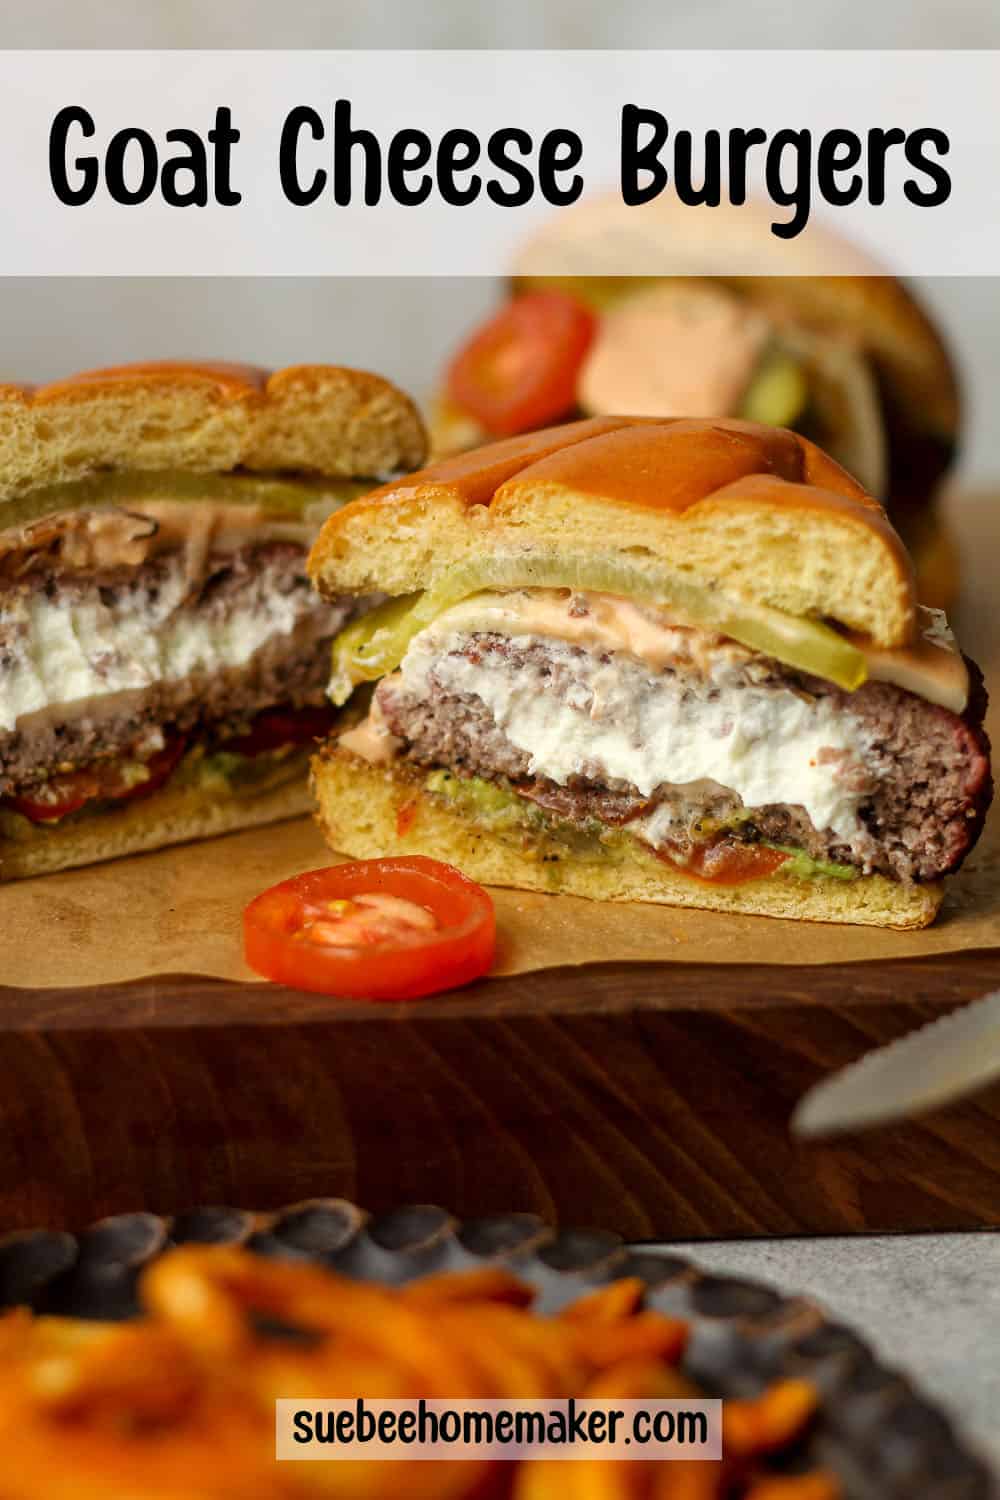 A board with some goat cheese burgers, one sliced in half.